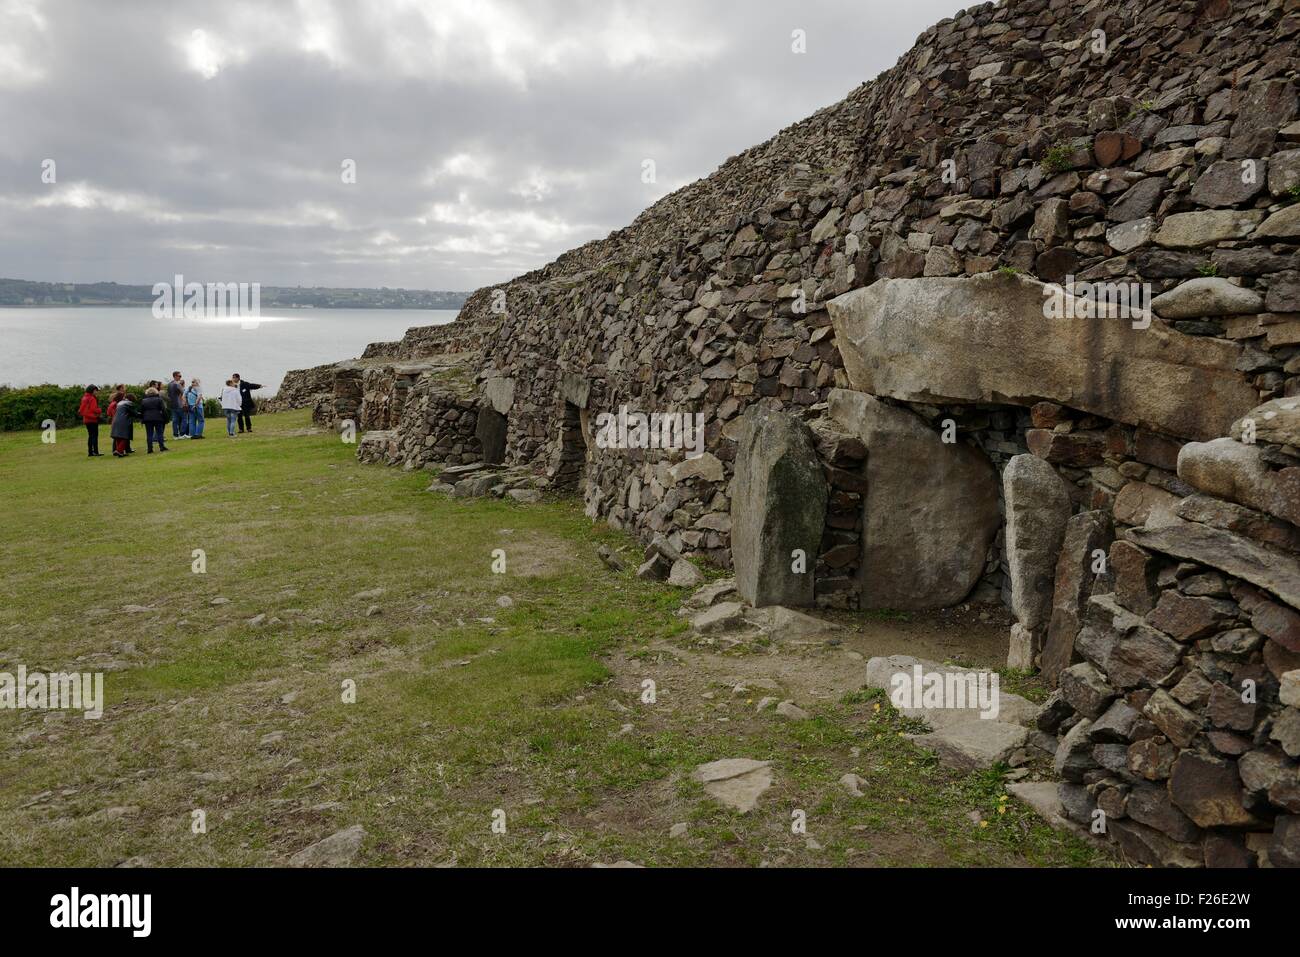 Early Neolithic 6800 year old Cairn Tumulus Mound of Barnenez contains 11 passage grave chambers. Plouezoc’h, Finistere, France Stock Photo